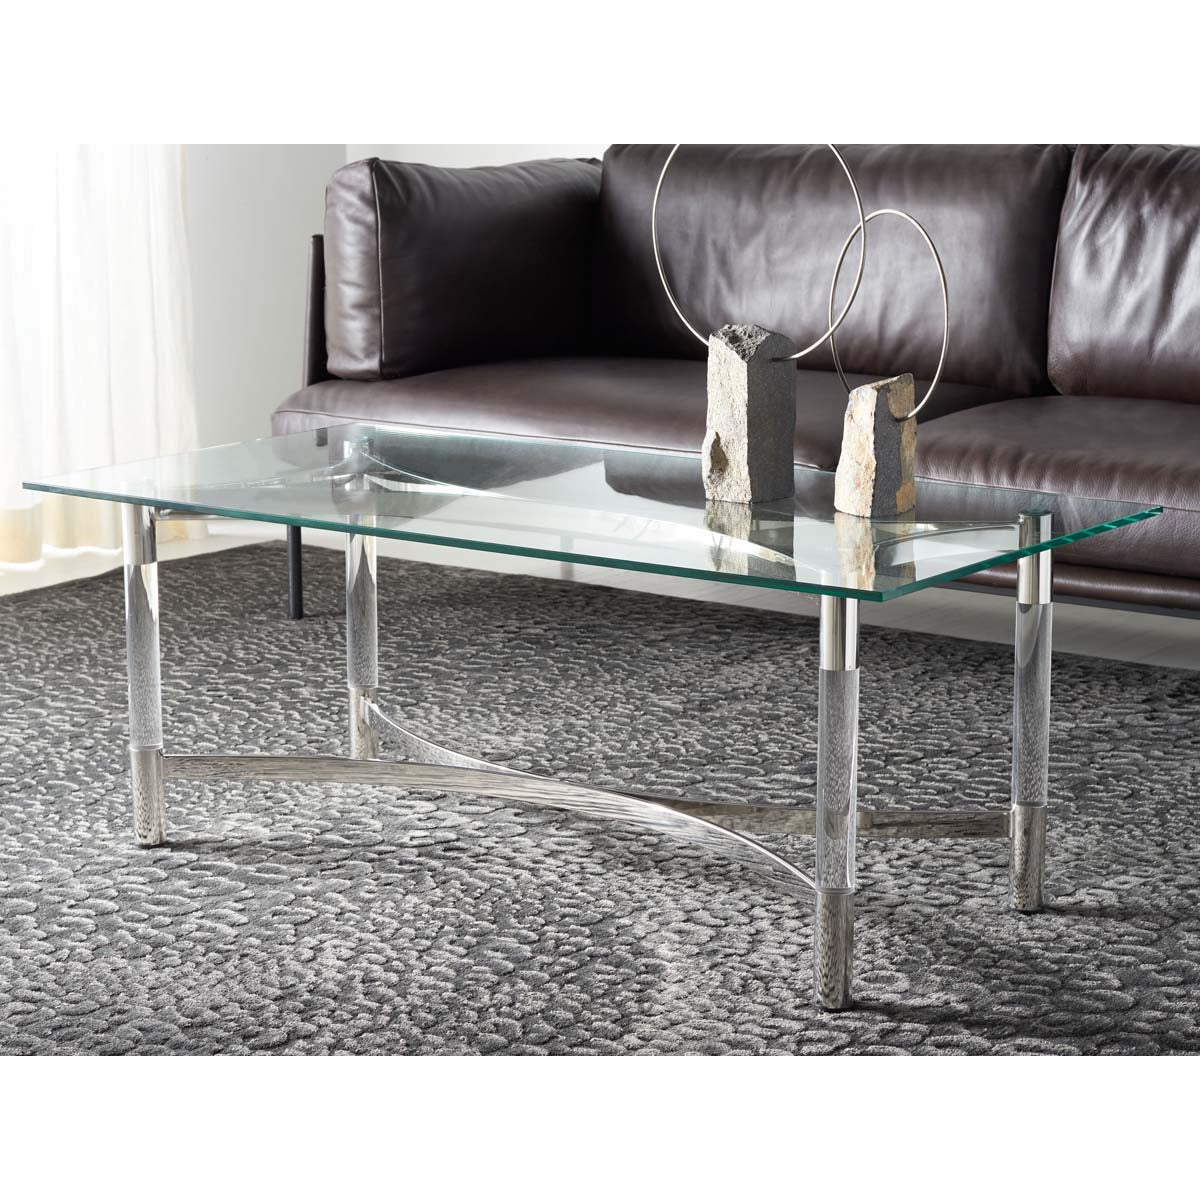 Safavieh Couture Letty Acrylic Coffee Table - Silver